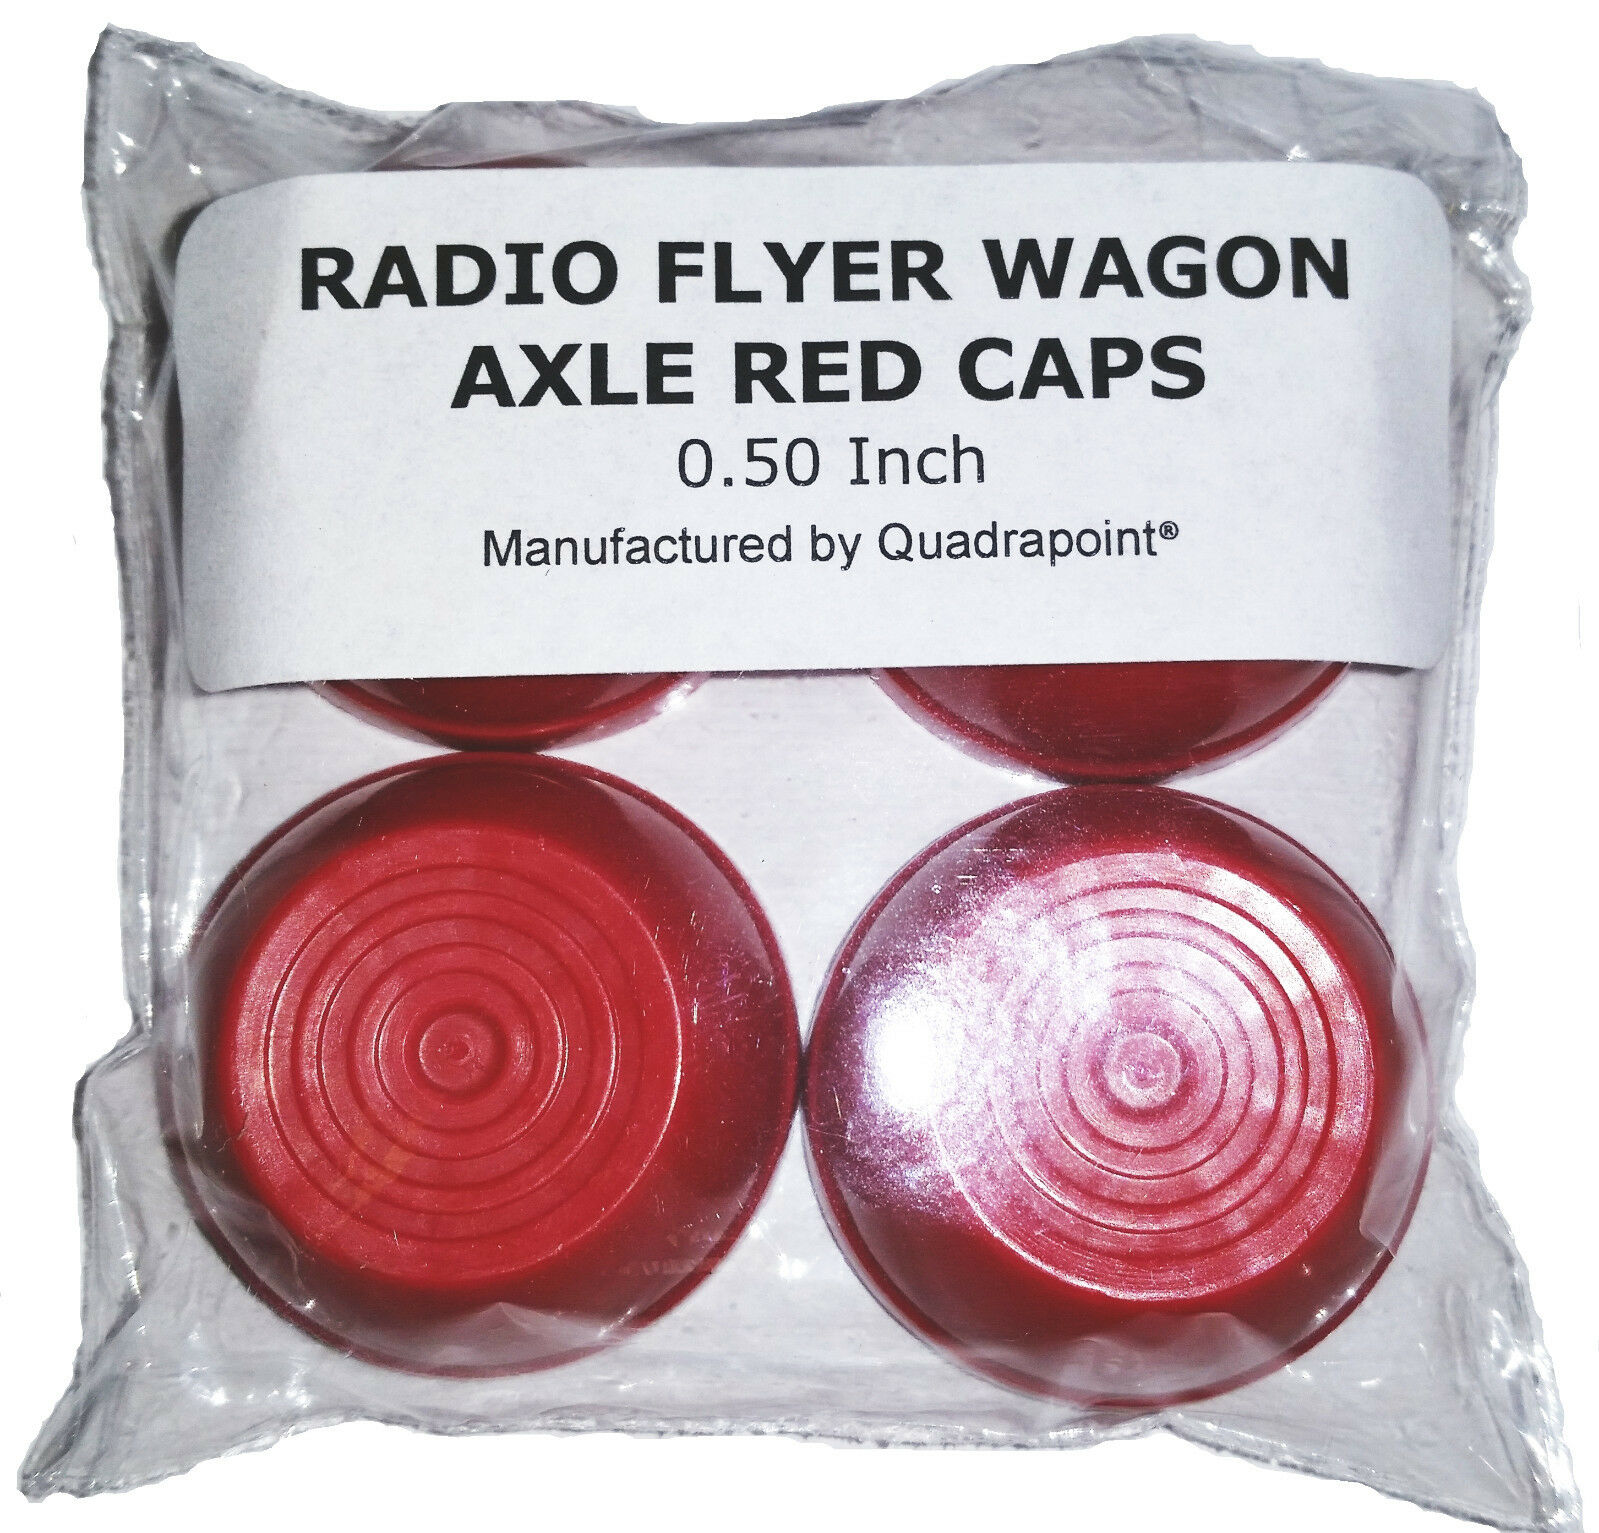 Radio Flyer Wagon Parts Axle Caps 0.50" New Red Caps With Instructions